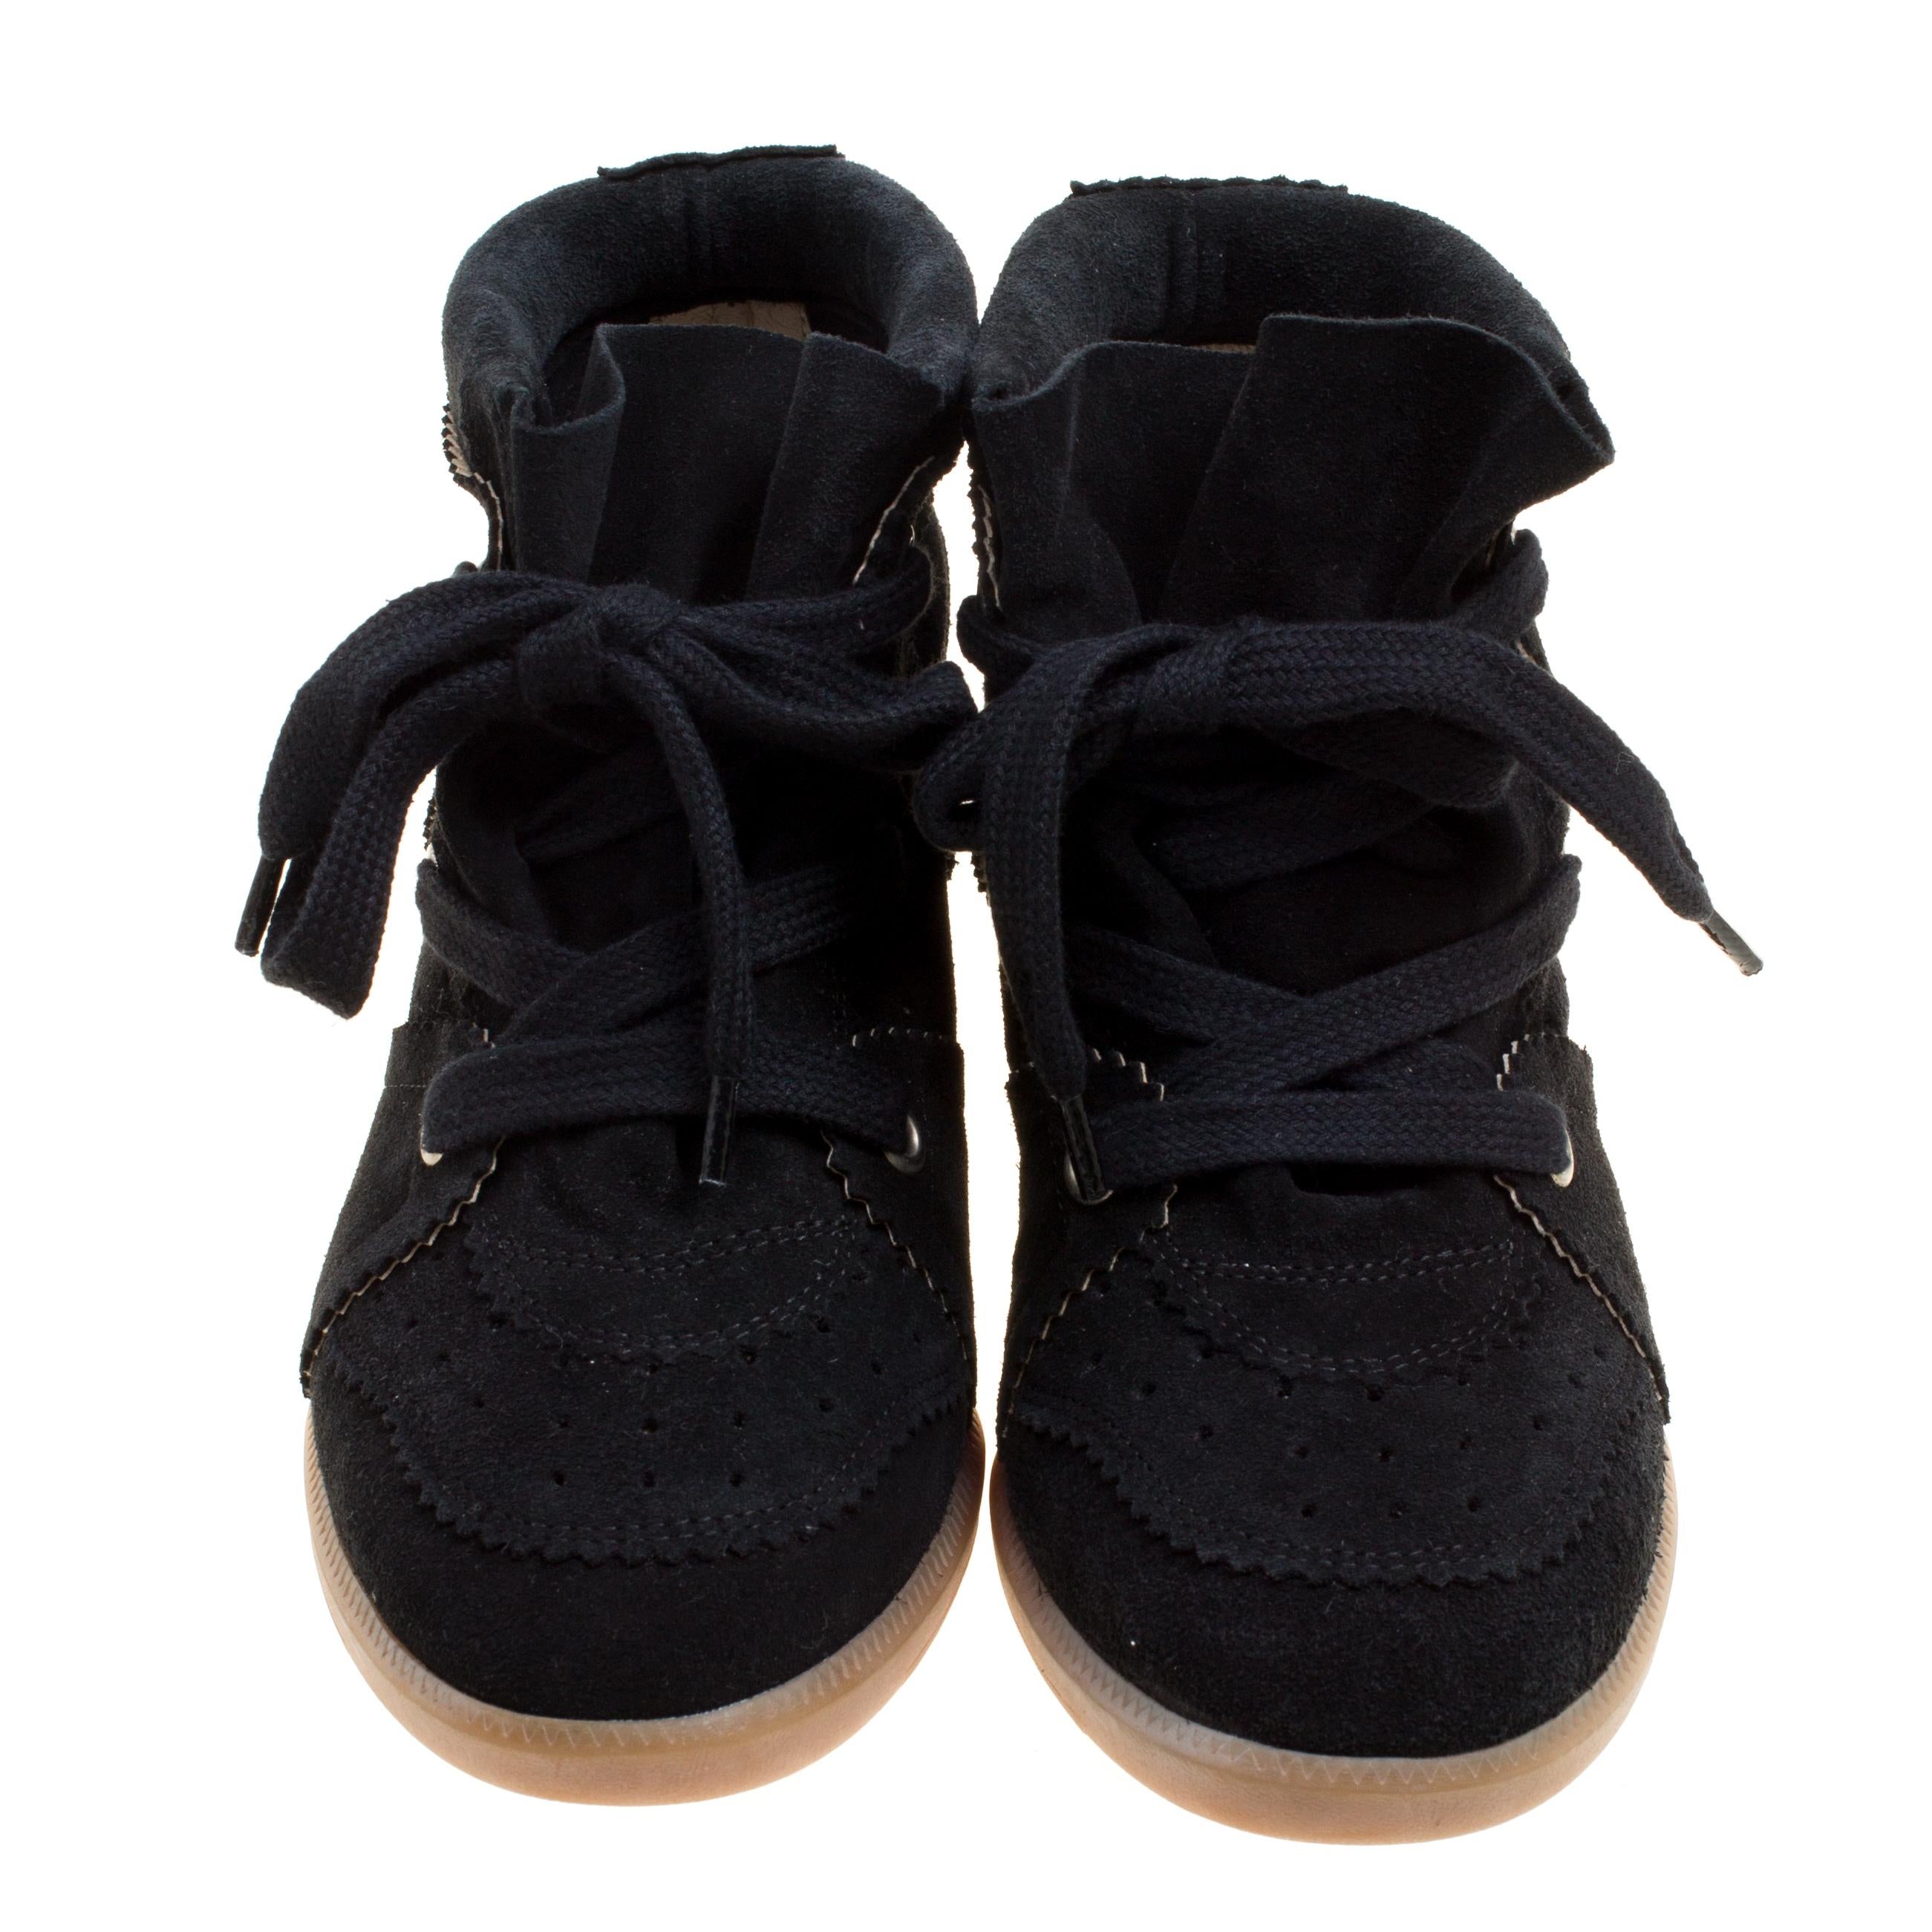 Whether you are travelling or simply out and about in the city, these Isabel Marant sneakers are a perfect choice. It is designed in a black suede body and detailed with lace-ups. They come with built-in wedge heels and make a comfortable wear for